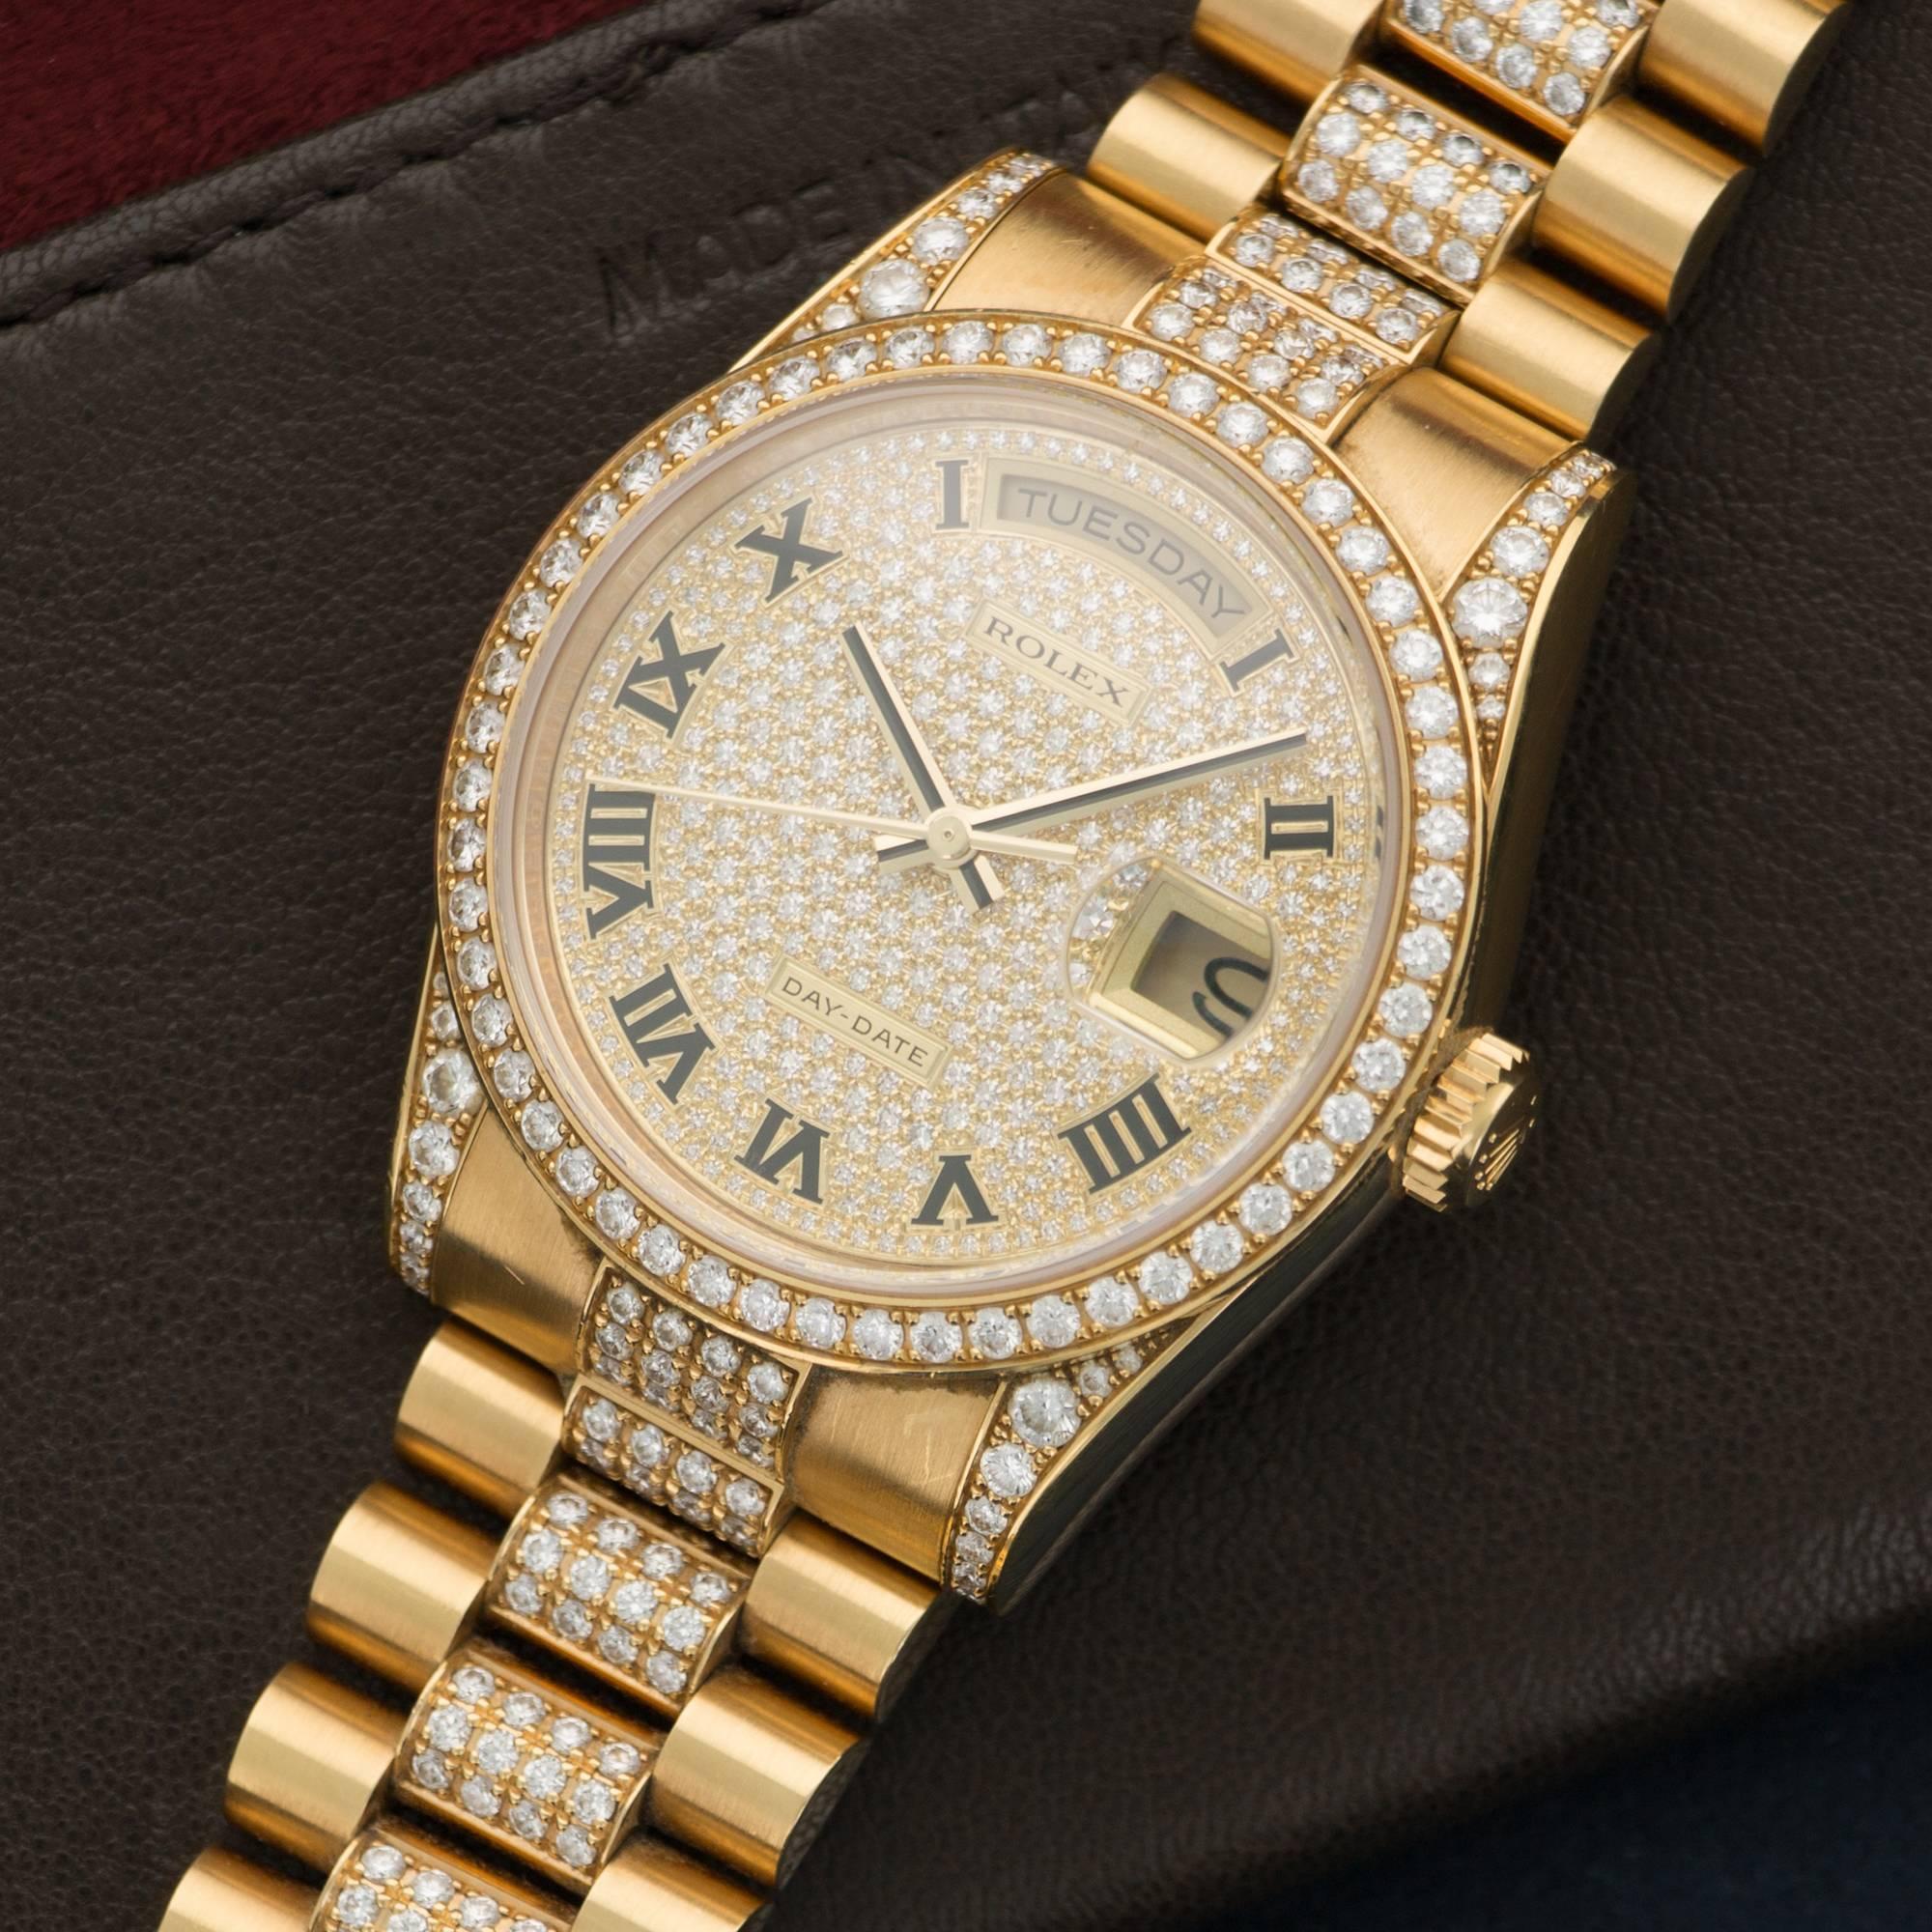 An 18k Yellow Gold Day-Date Rolex with Full Pave Diamond Dial, Diamond Bezel, Diamond Lugs, and Diamond Bracelet. All 
Original Setting. 36mm Case Diameter. Like New Condition in the Original Box. Sold Originally for over $115,000